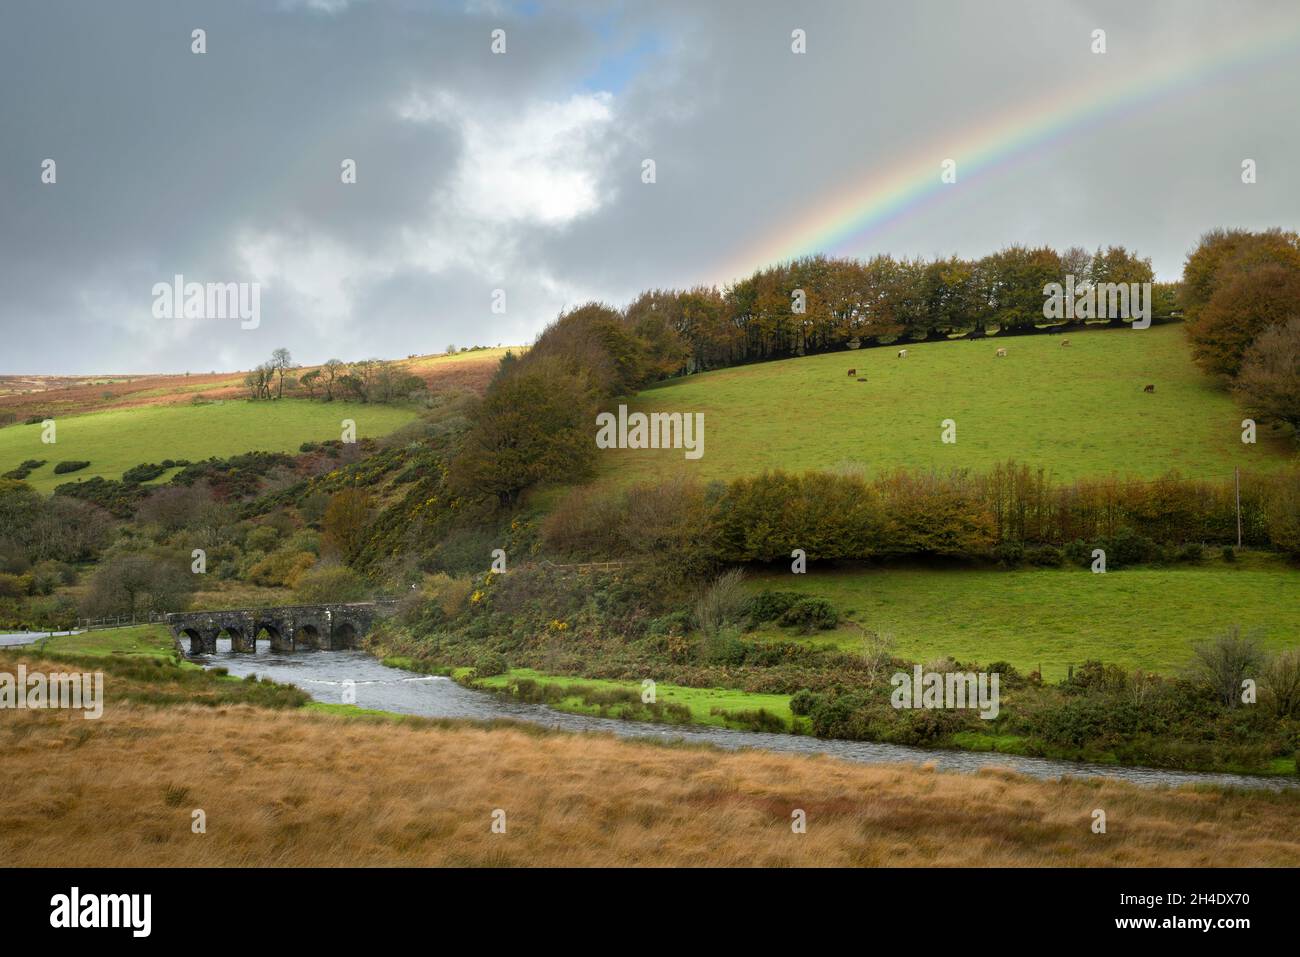 A rainbow over the medieval Landacre Bridge spanning the River Barle in autumn near Withypool in Exmoor National Park, Somerset, England. Stock Photo